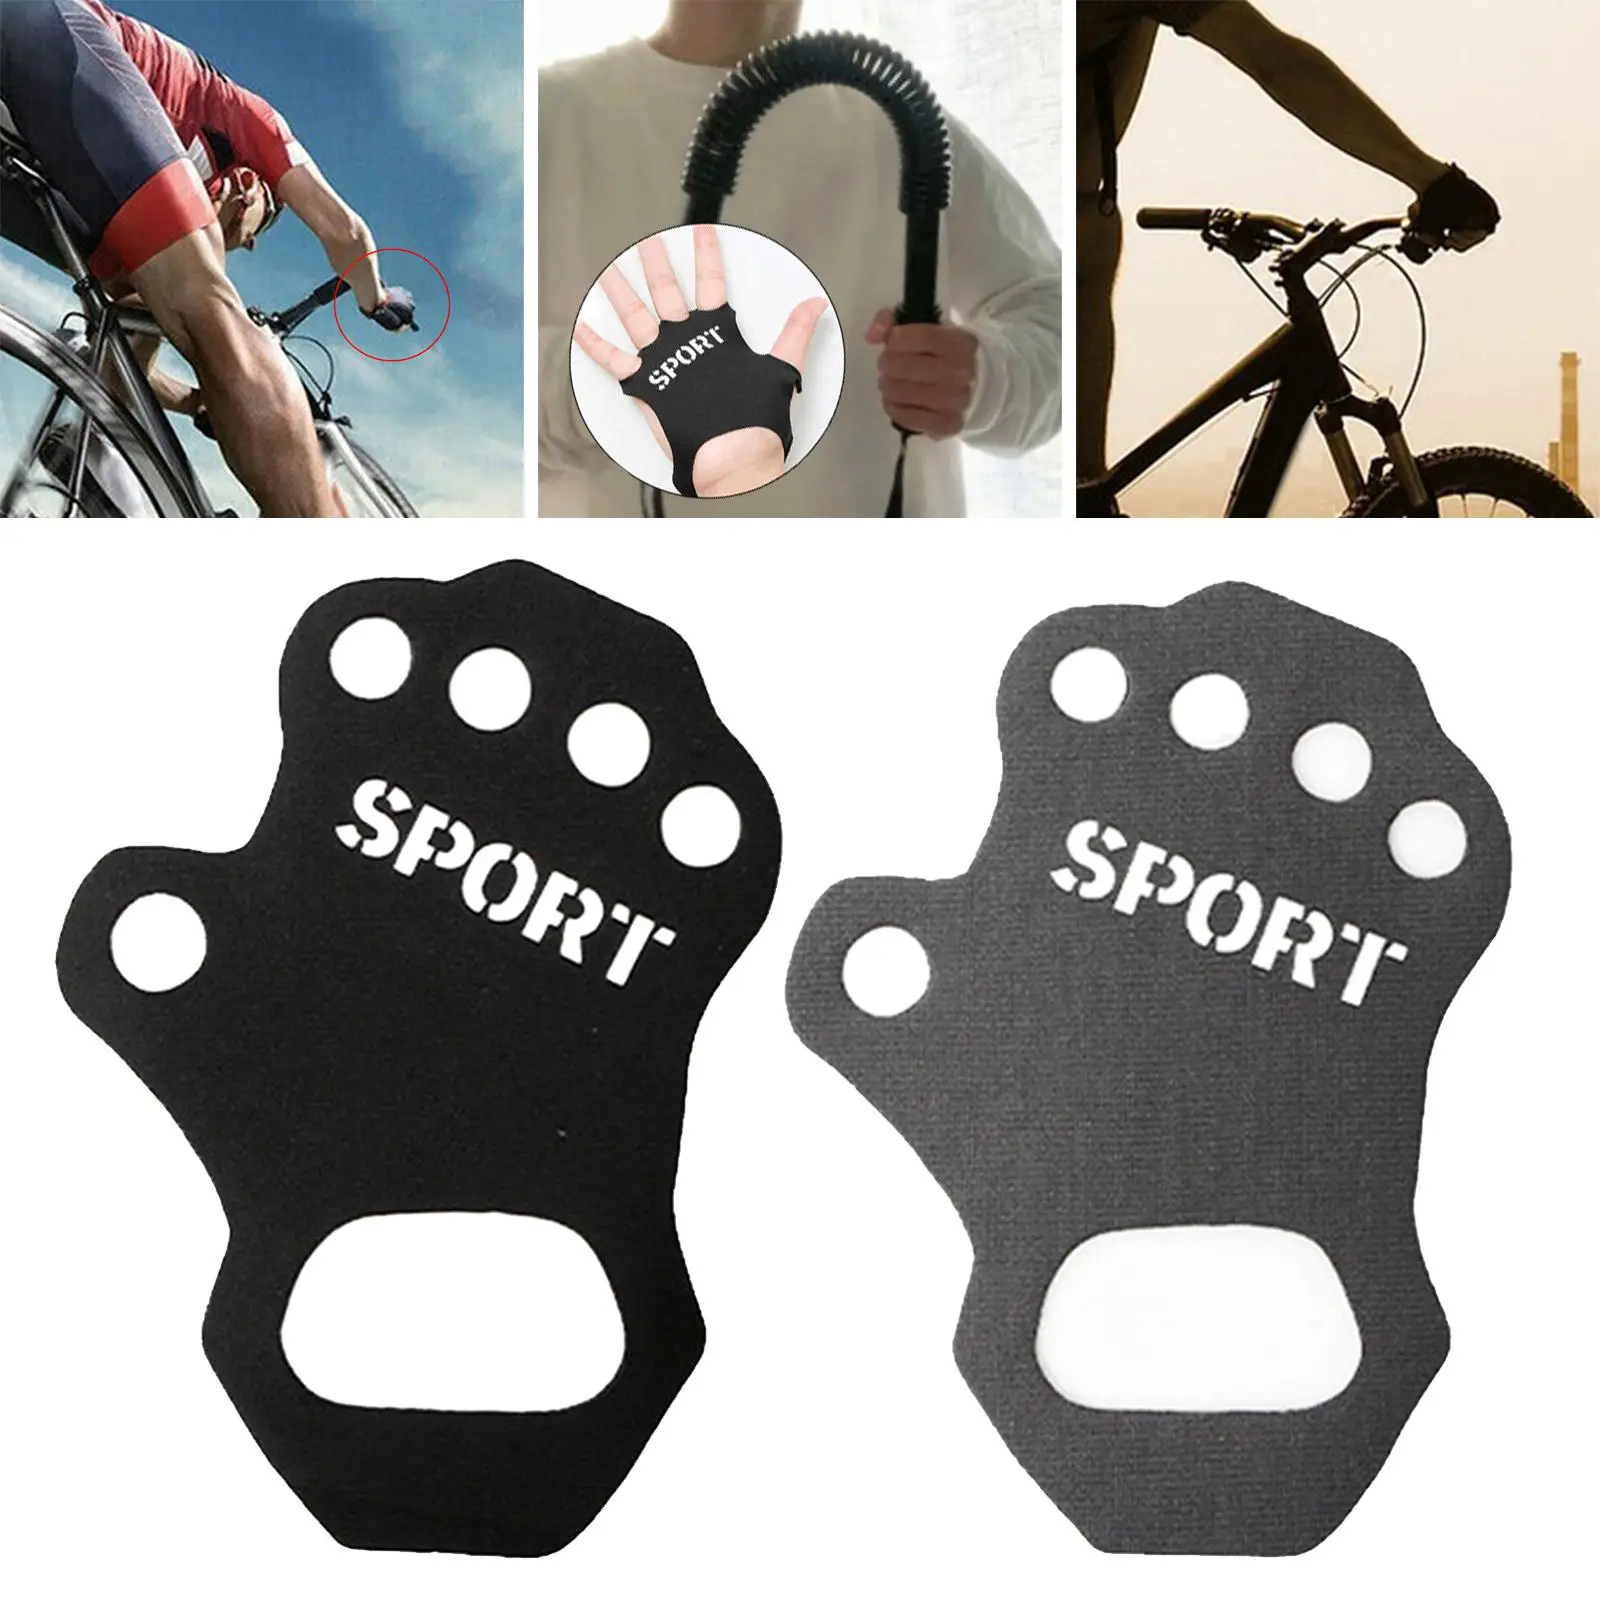 Weight Lifting Glove Palm Protect Full Palm Protection Exercise Grip Pad for Powerlifting Fitness Cycling Hanging Training